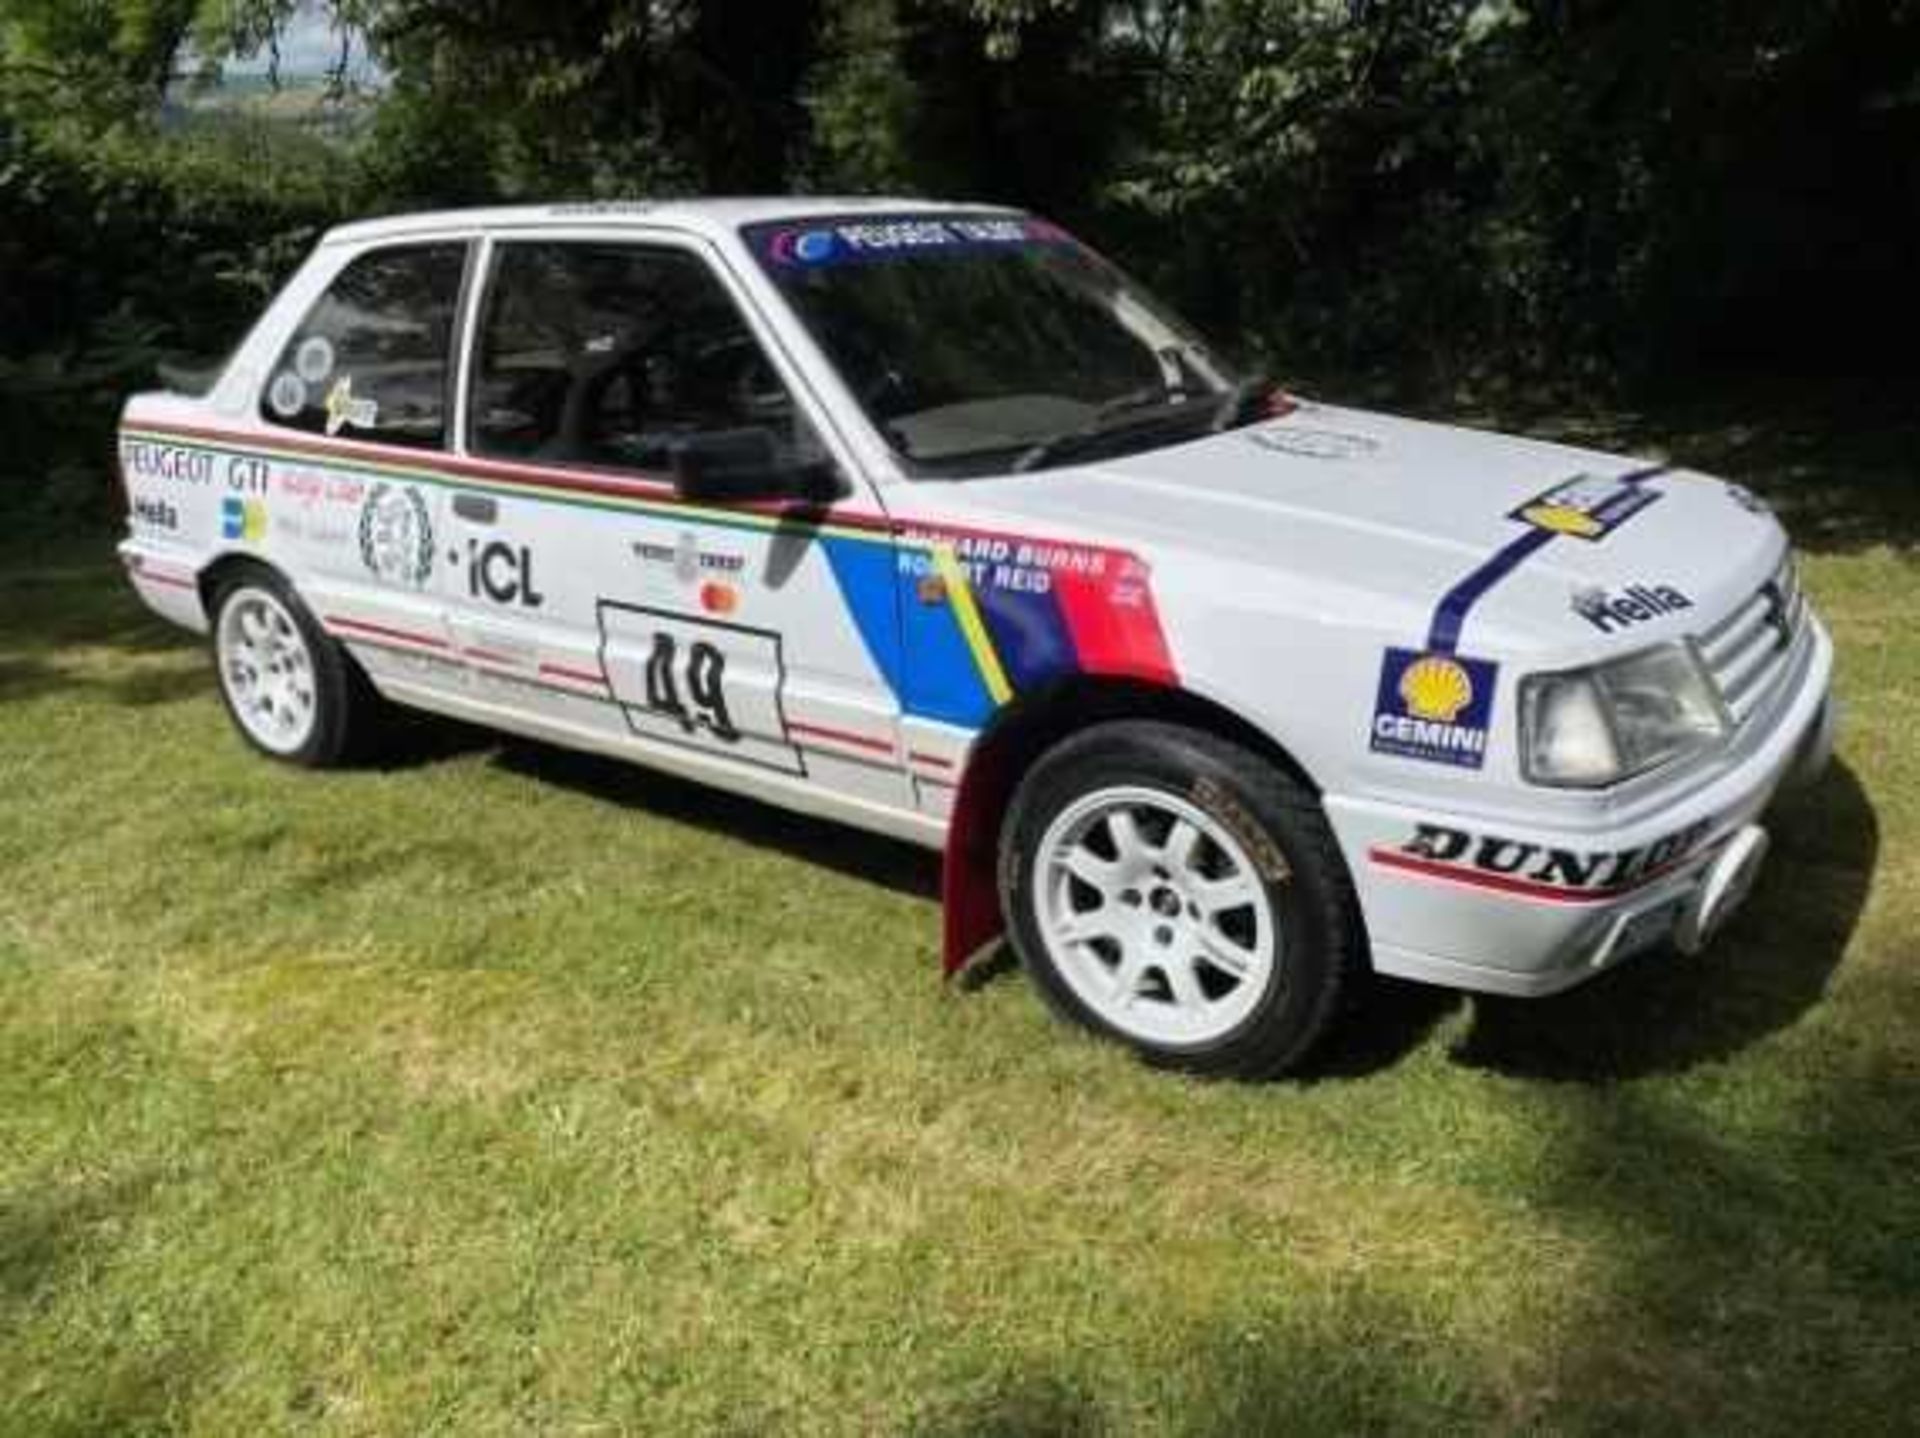 1987 Peugeot 309 GTi Group N Rally Car FIA paperwork and a previous entrant at the Goodwood Festival - Image 48 of 50